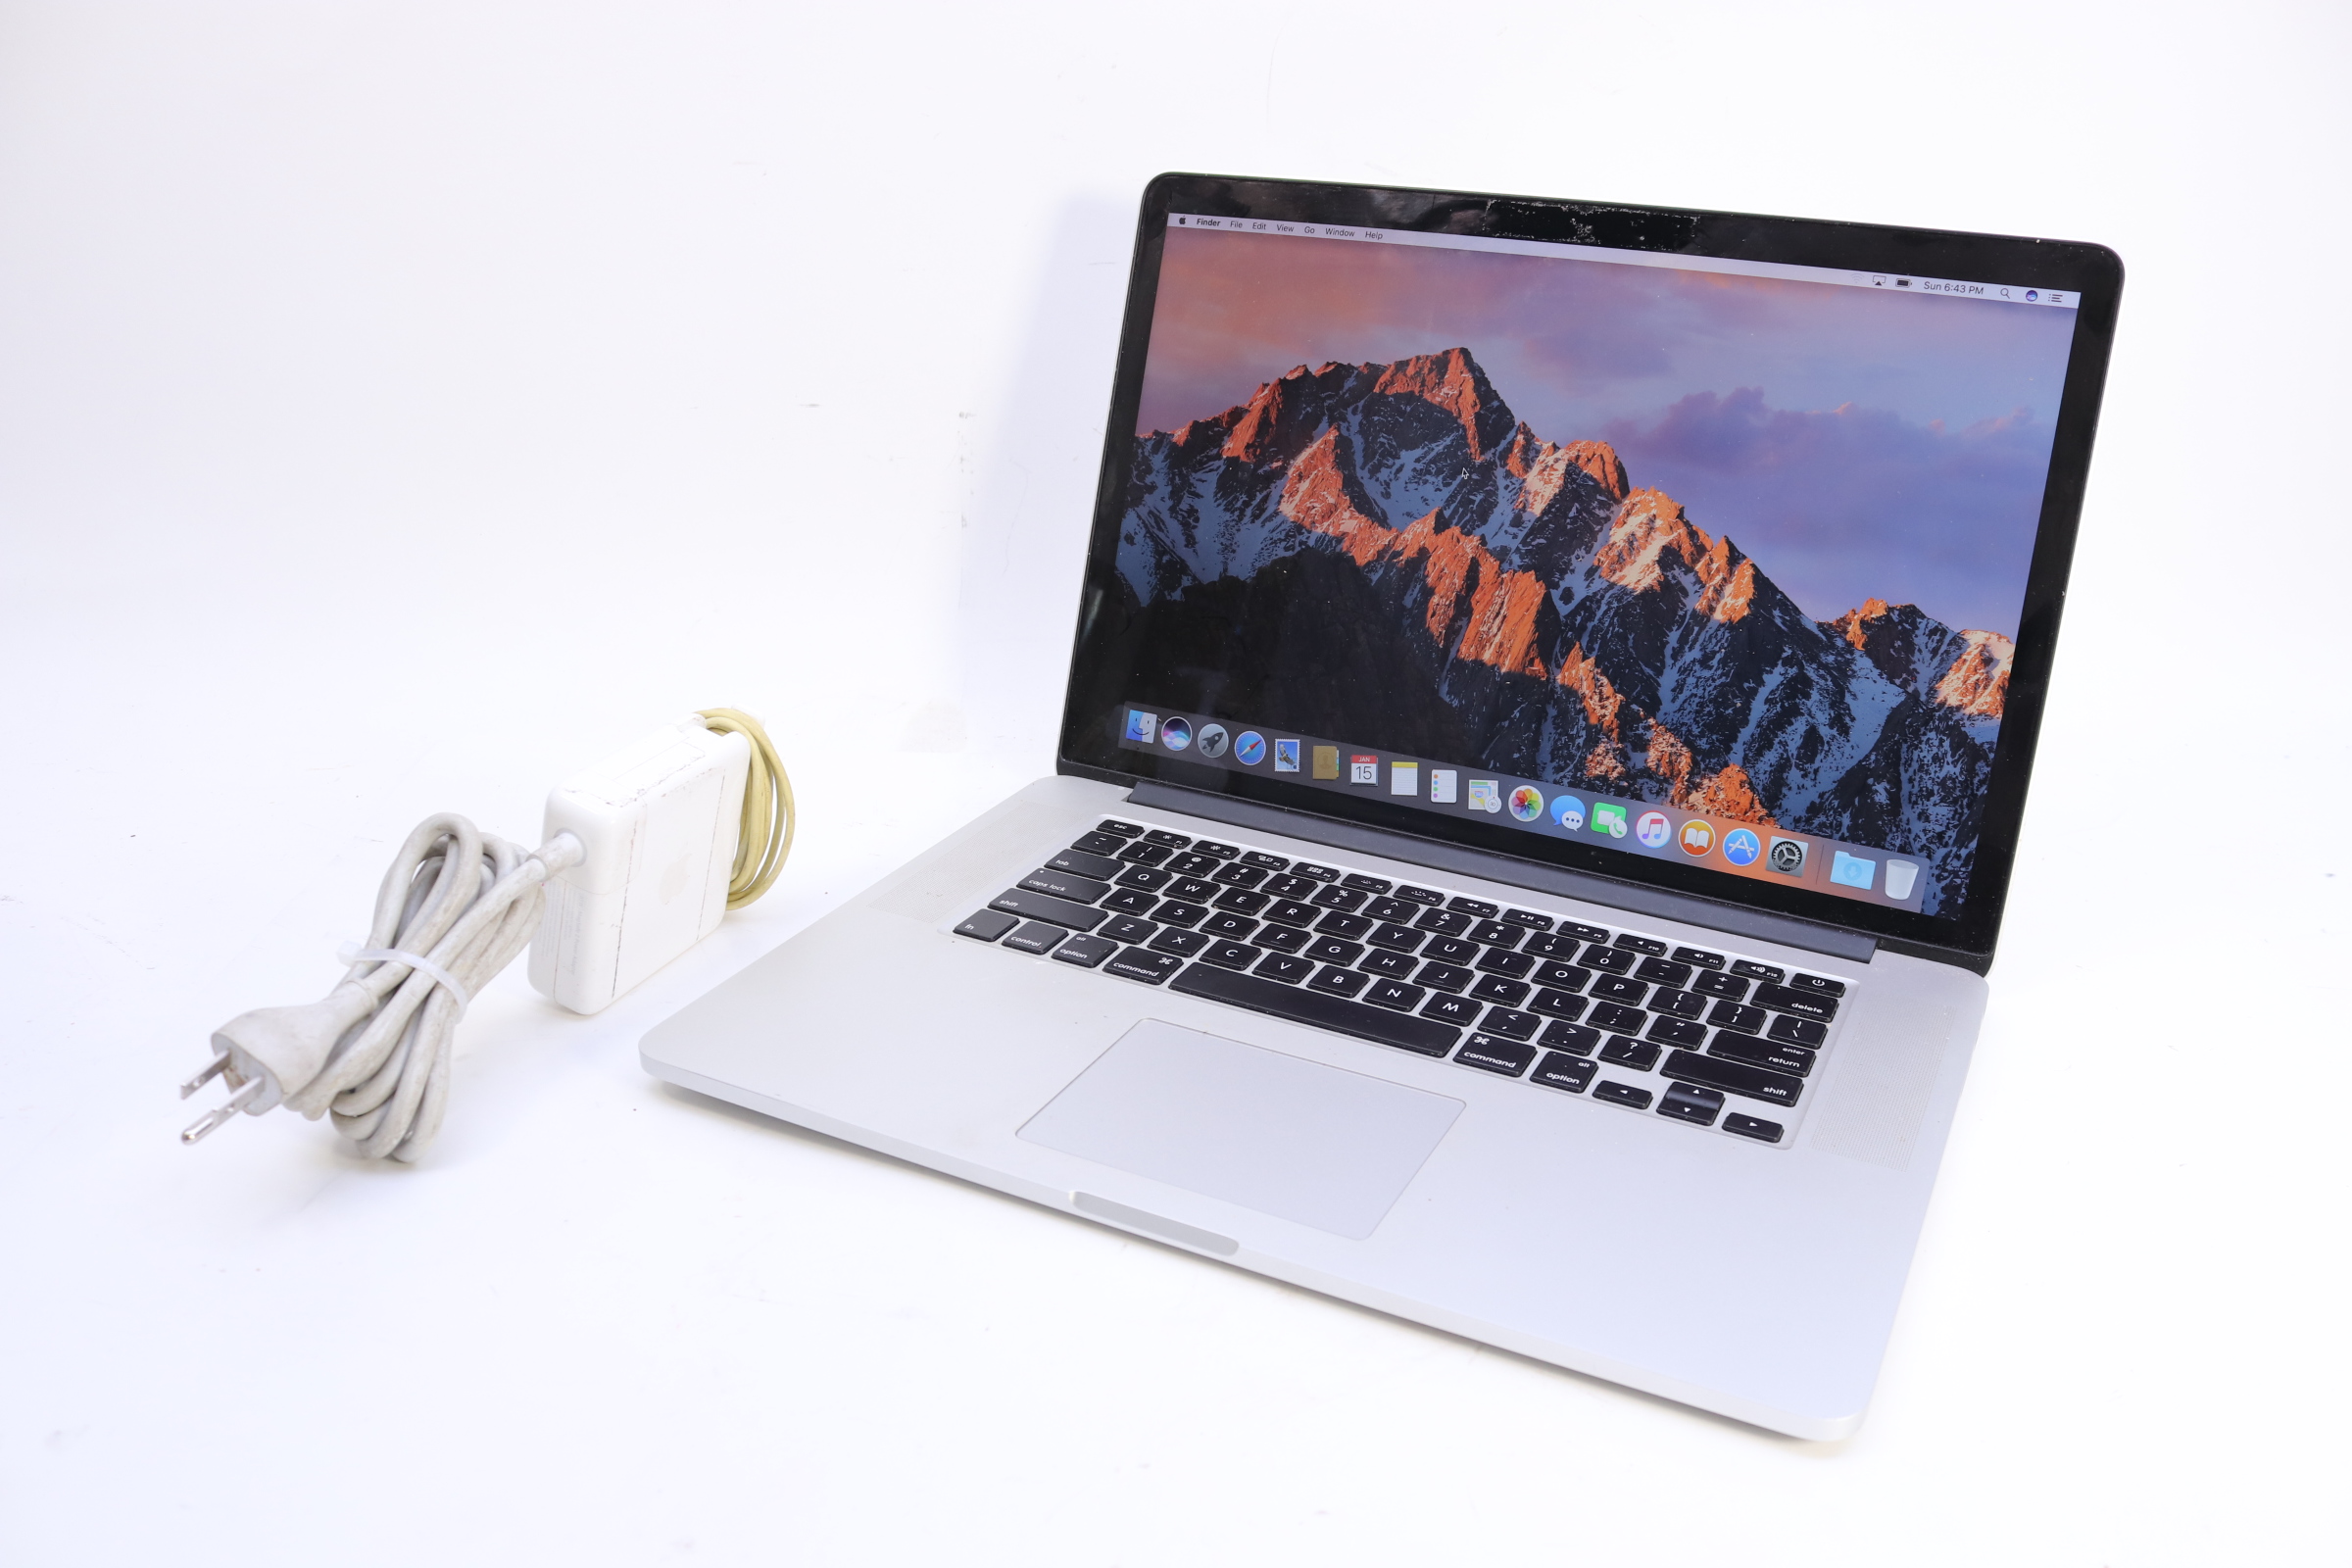 MacBook Pro (Retina, 15-inch, Mid 2015) - Technical Specifications